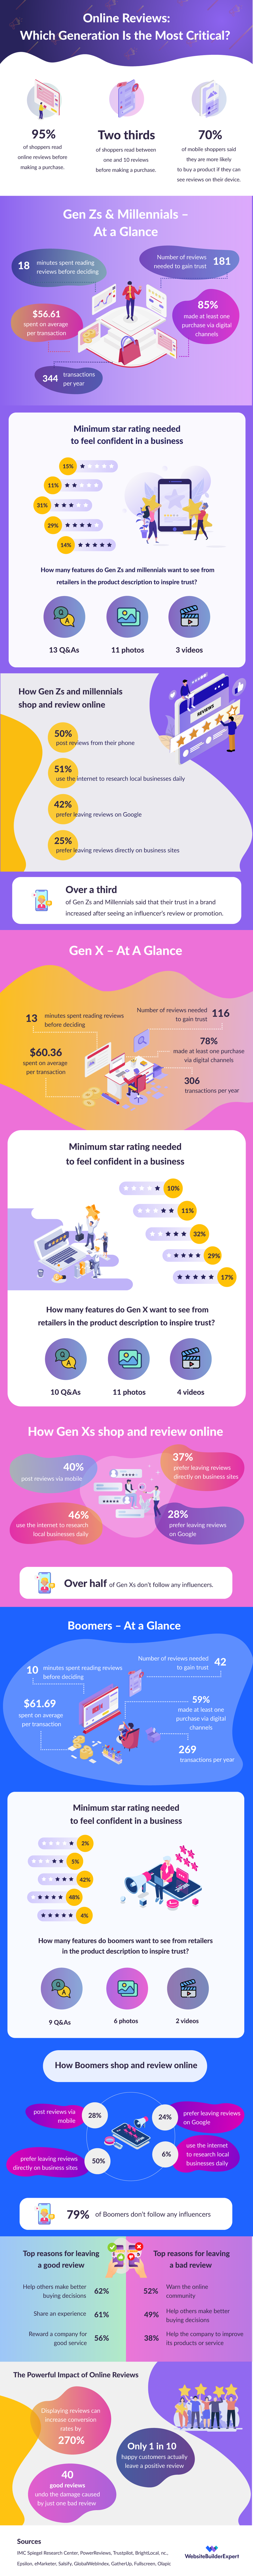 An inforgraphic on online reviews